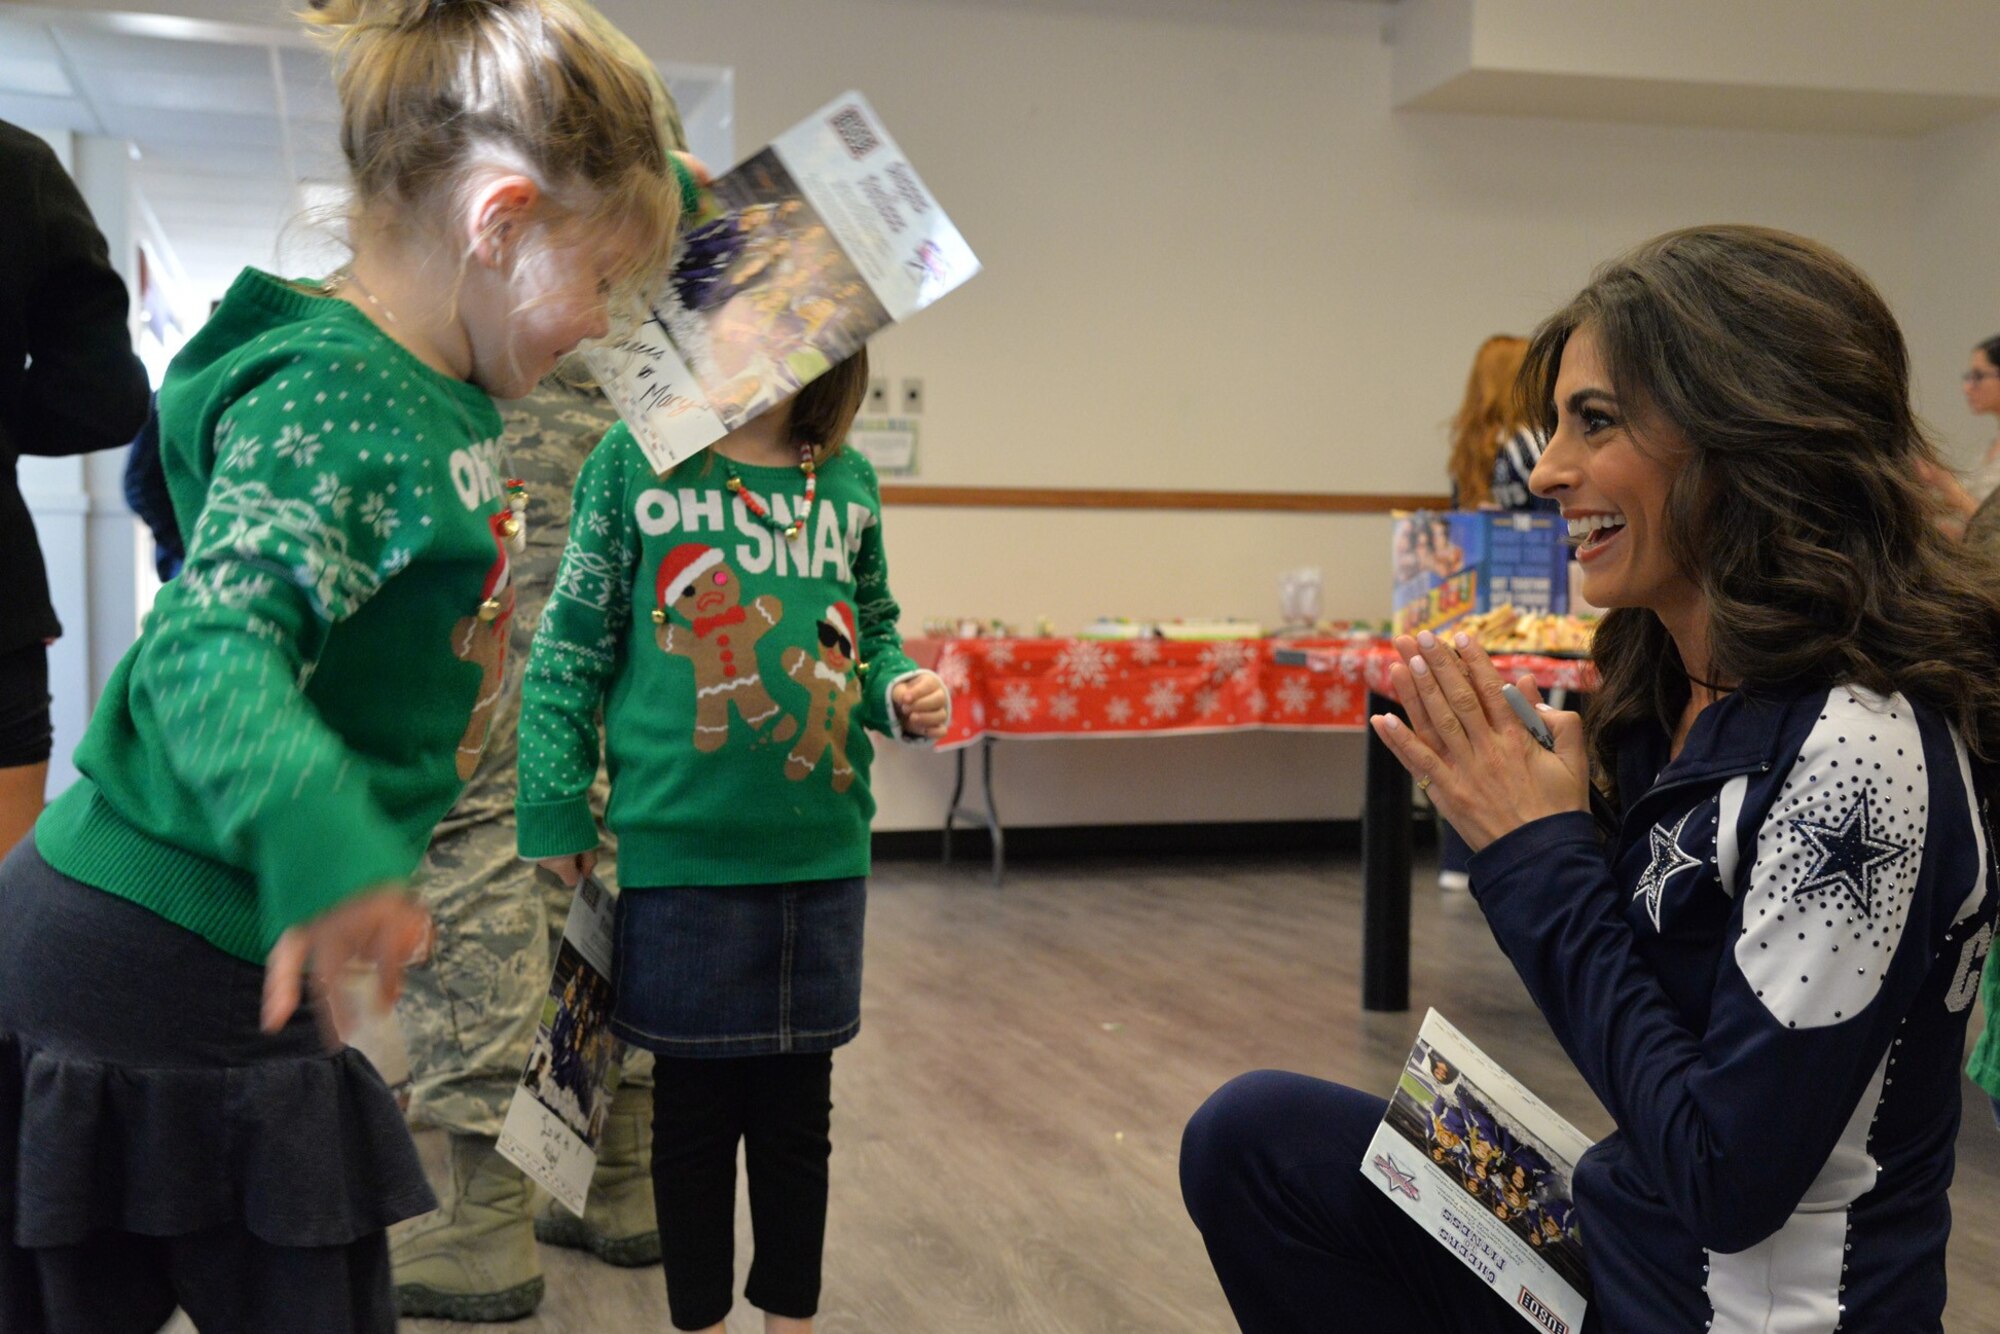 Dallas Cowboys Cheerleader Jinelle Esther, spends time with deployed affected families during a luncheon at the base chapel Dec. 2, 2017, at Malmstrom Air Force Base, Mont.